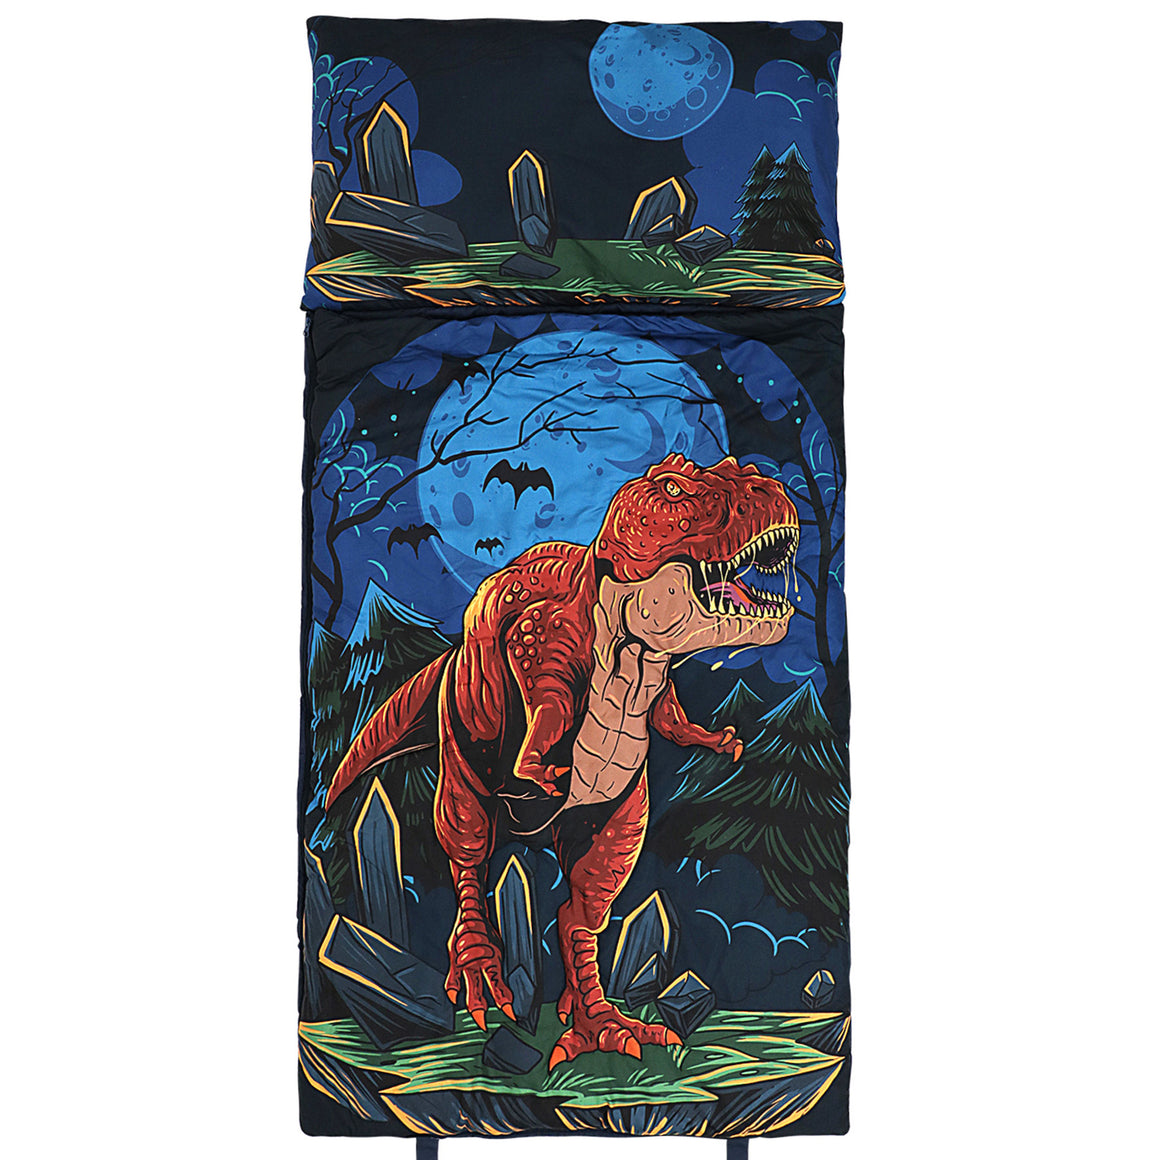 Dinosaur Childs Sleeping Bag with Pillow for kids